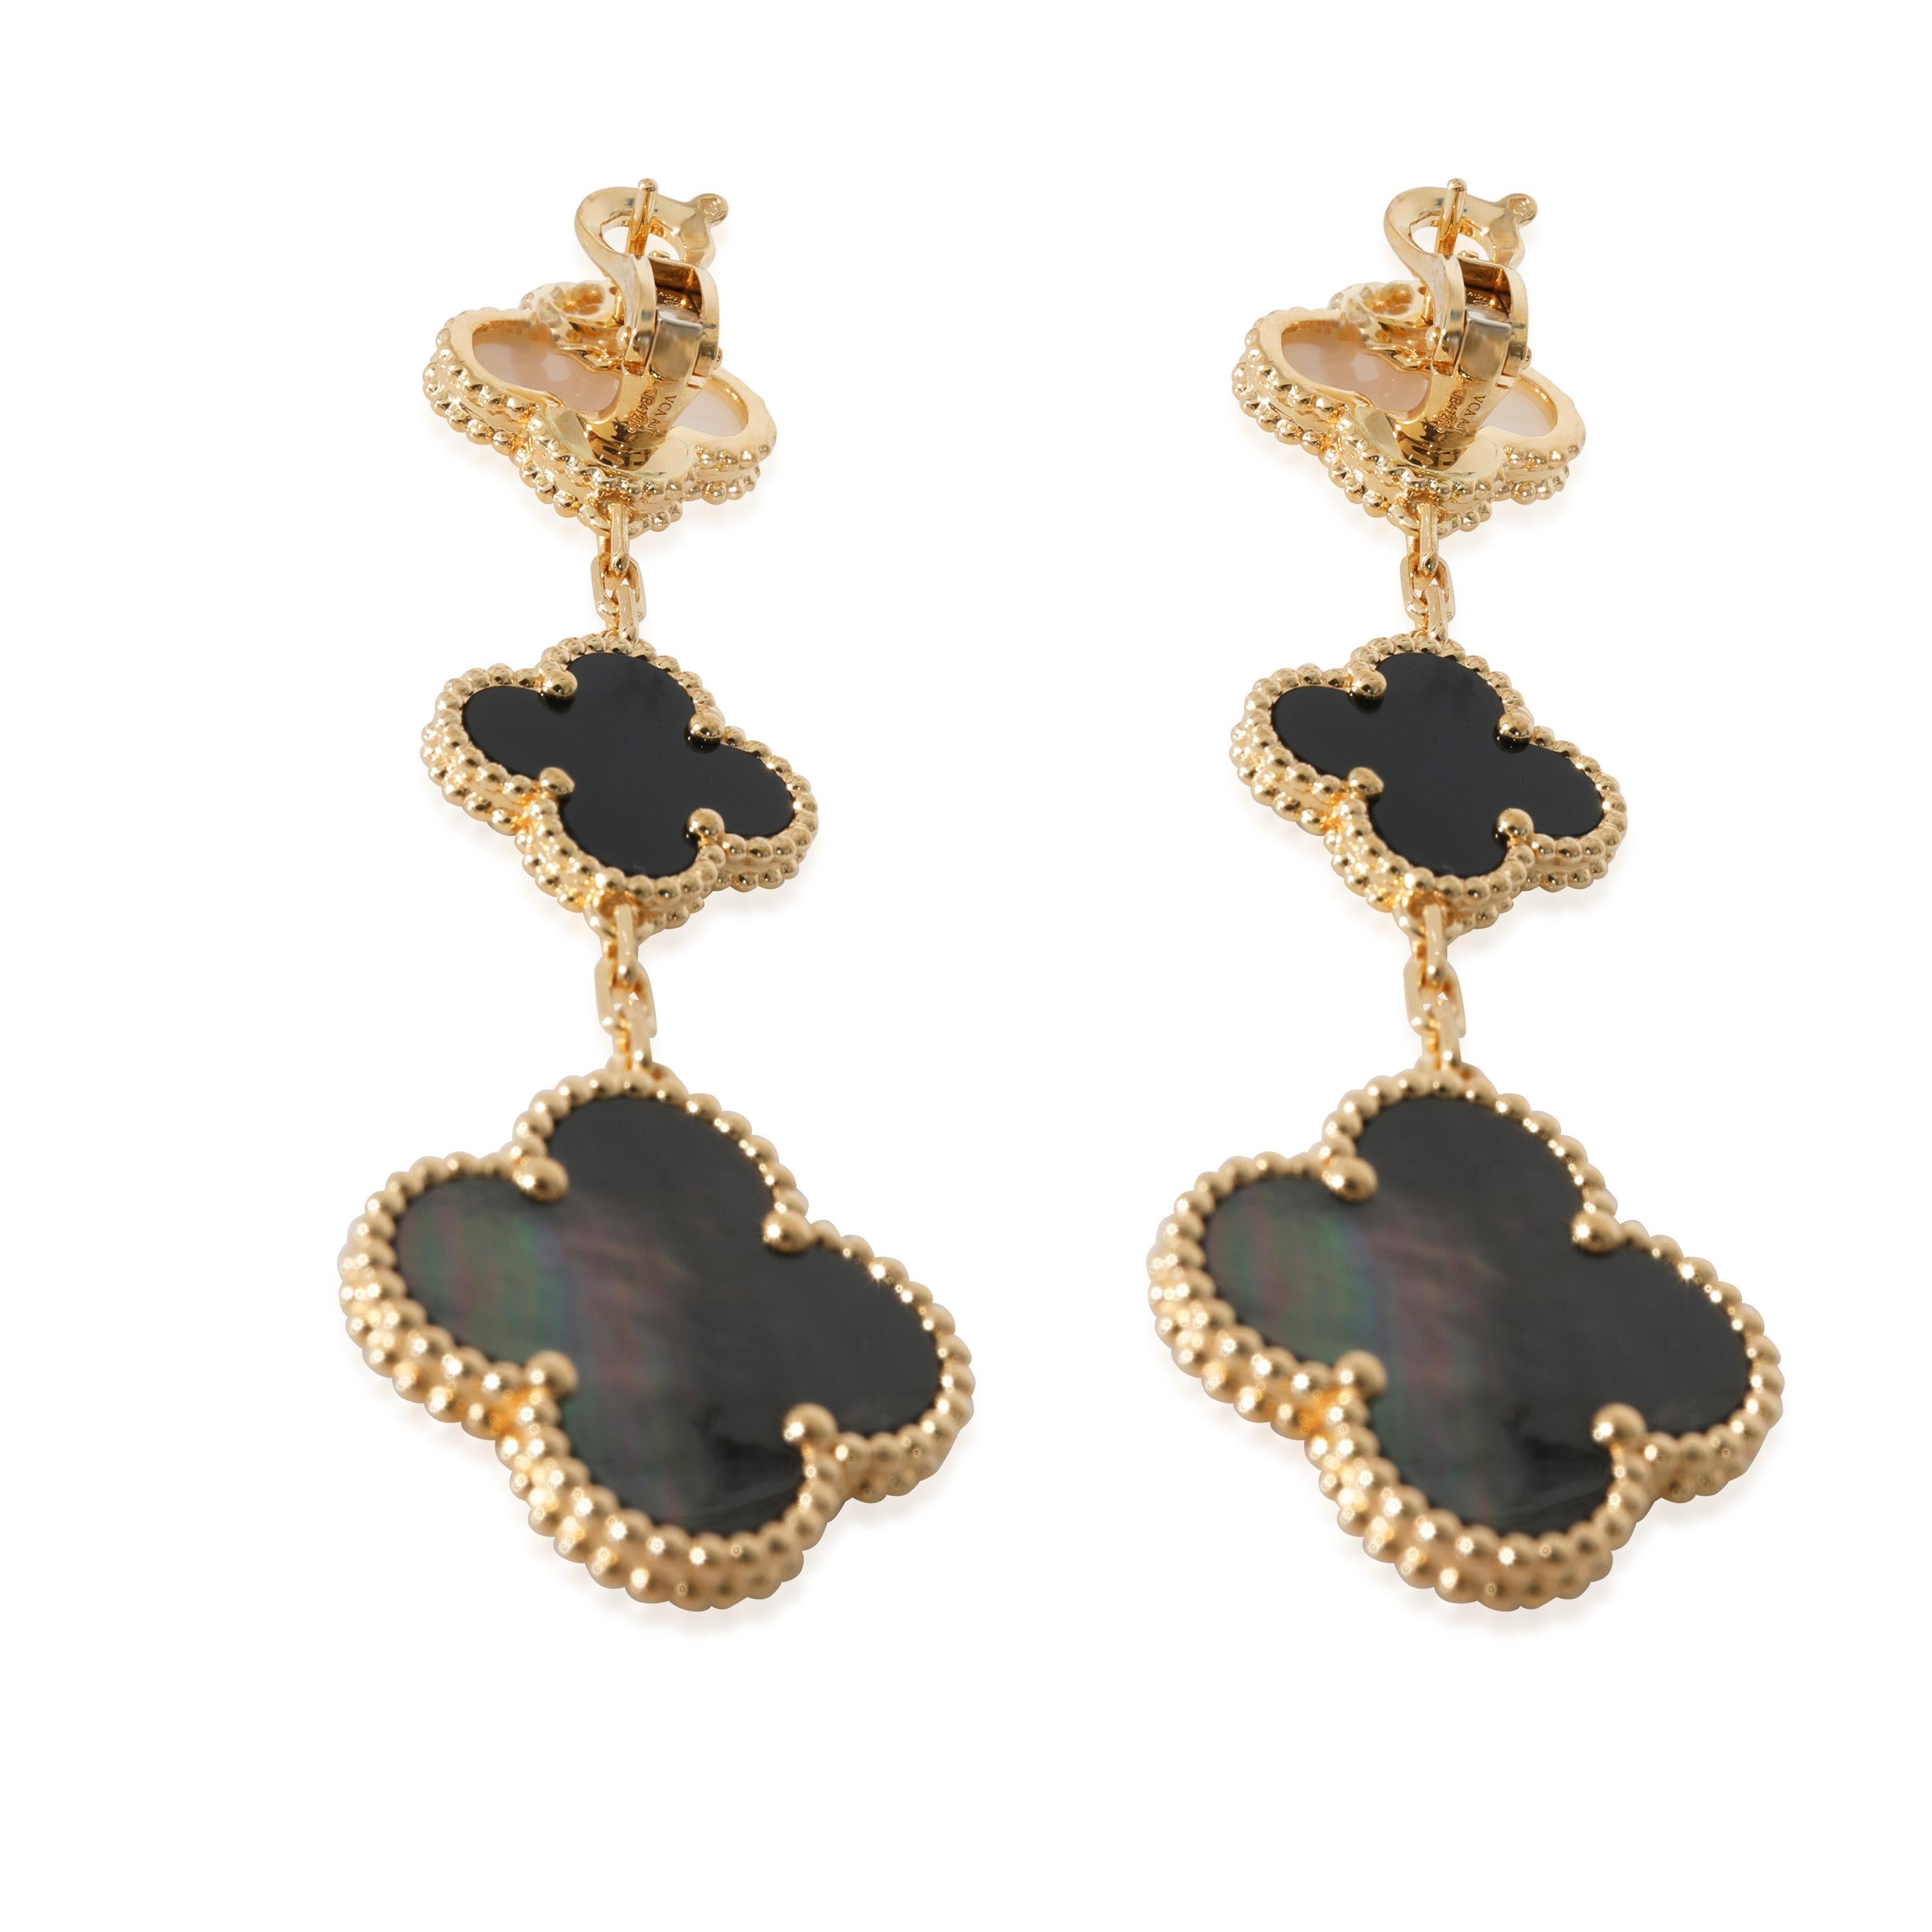 Van Cleef & Arpels Alhambra Mother Of Pearl Onyx Earrings in 18k Yellow Gold

PRIMARY DETAILS
SKU: 129938
Listing Title: Van Cleef & Arpels Alhambra Mother Of Pearl Onyx Earrings in 18k Yellow Gold
Condition Description: Launched in 1968, the